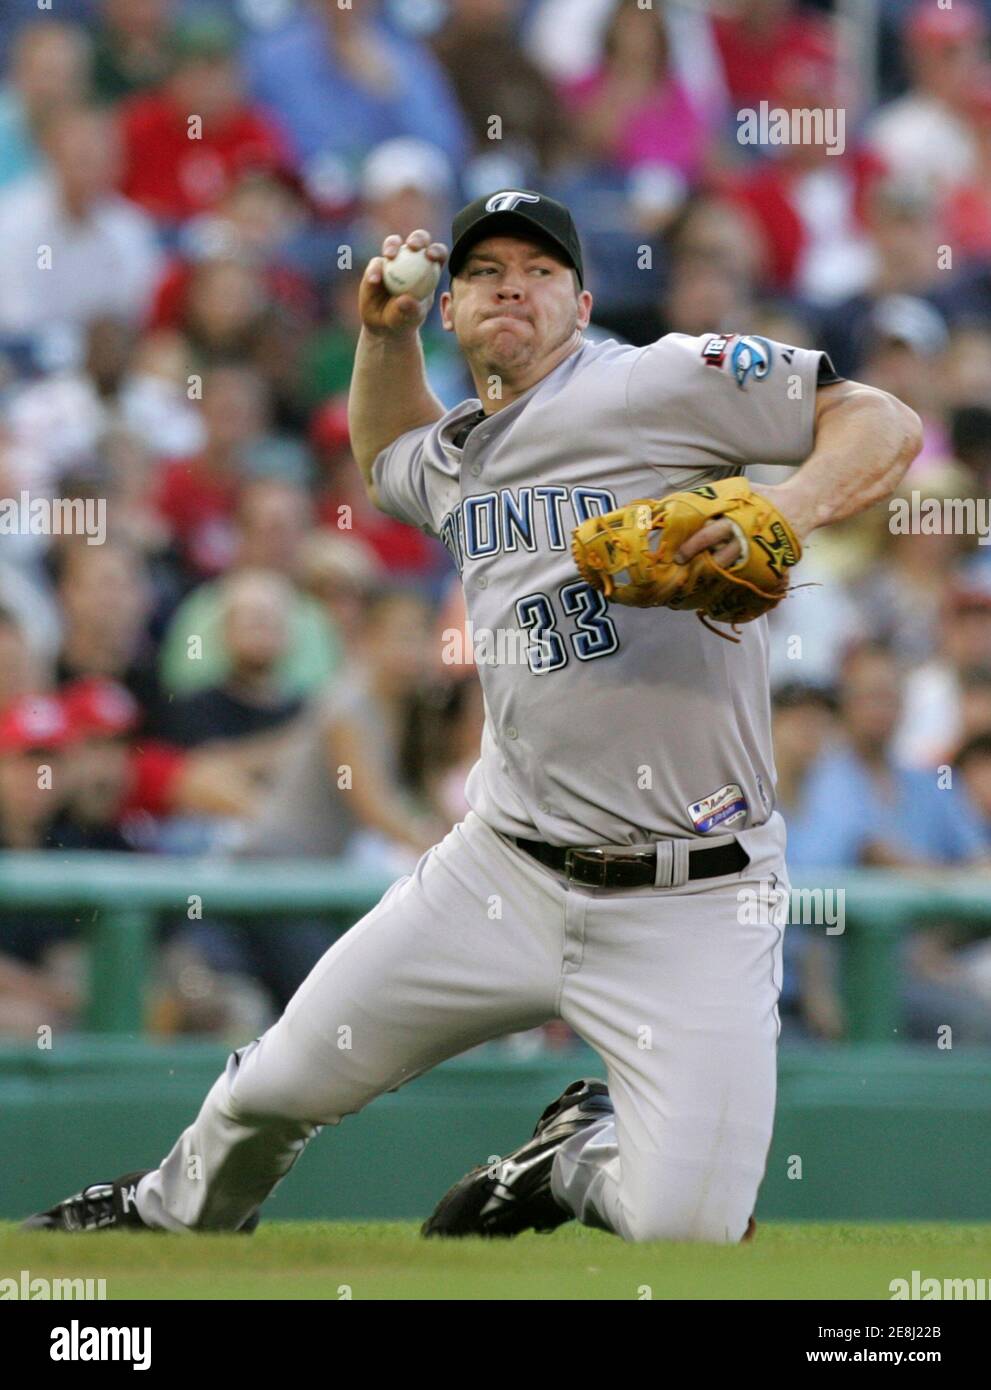 Toronto Blue Jays third baseman Scott Rolen throws from his knees in an attempt to put out Washington Nationals batter Elijah Dukes (not pictured) in the second inning of their MLB interleague baseball game in Washington June 20, 2009. Dukes was safe on an infield single.   REUTERS/Gary Cameron (UNITED STATES SPORT BASEBALL) Stock Photo